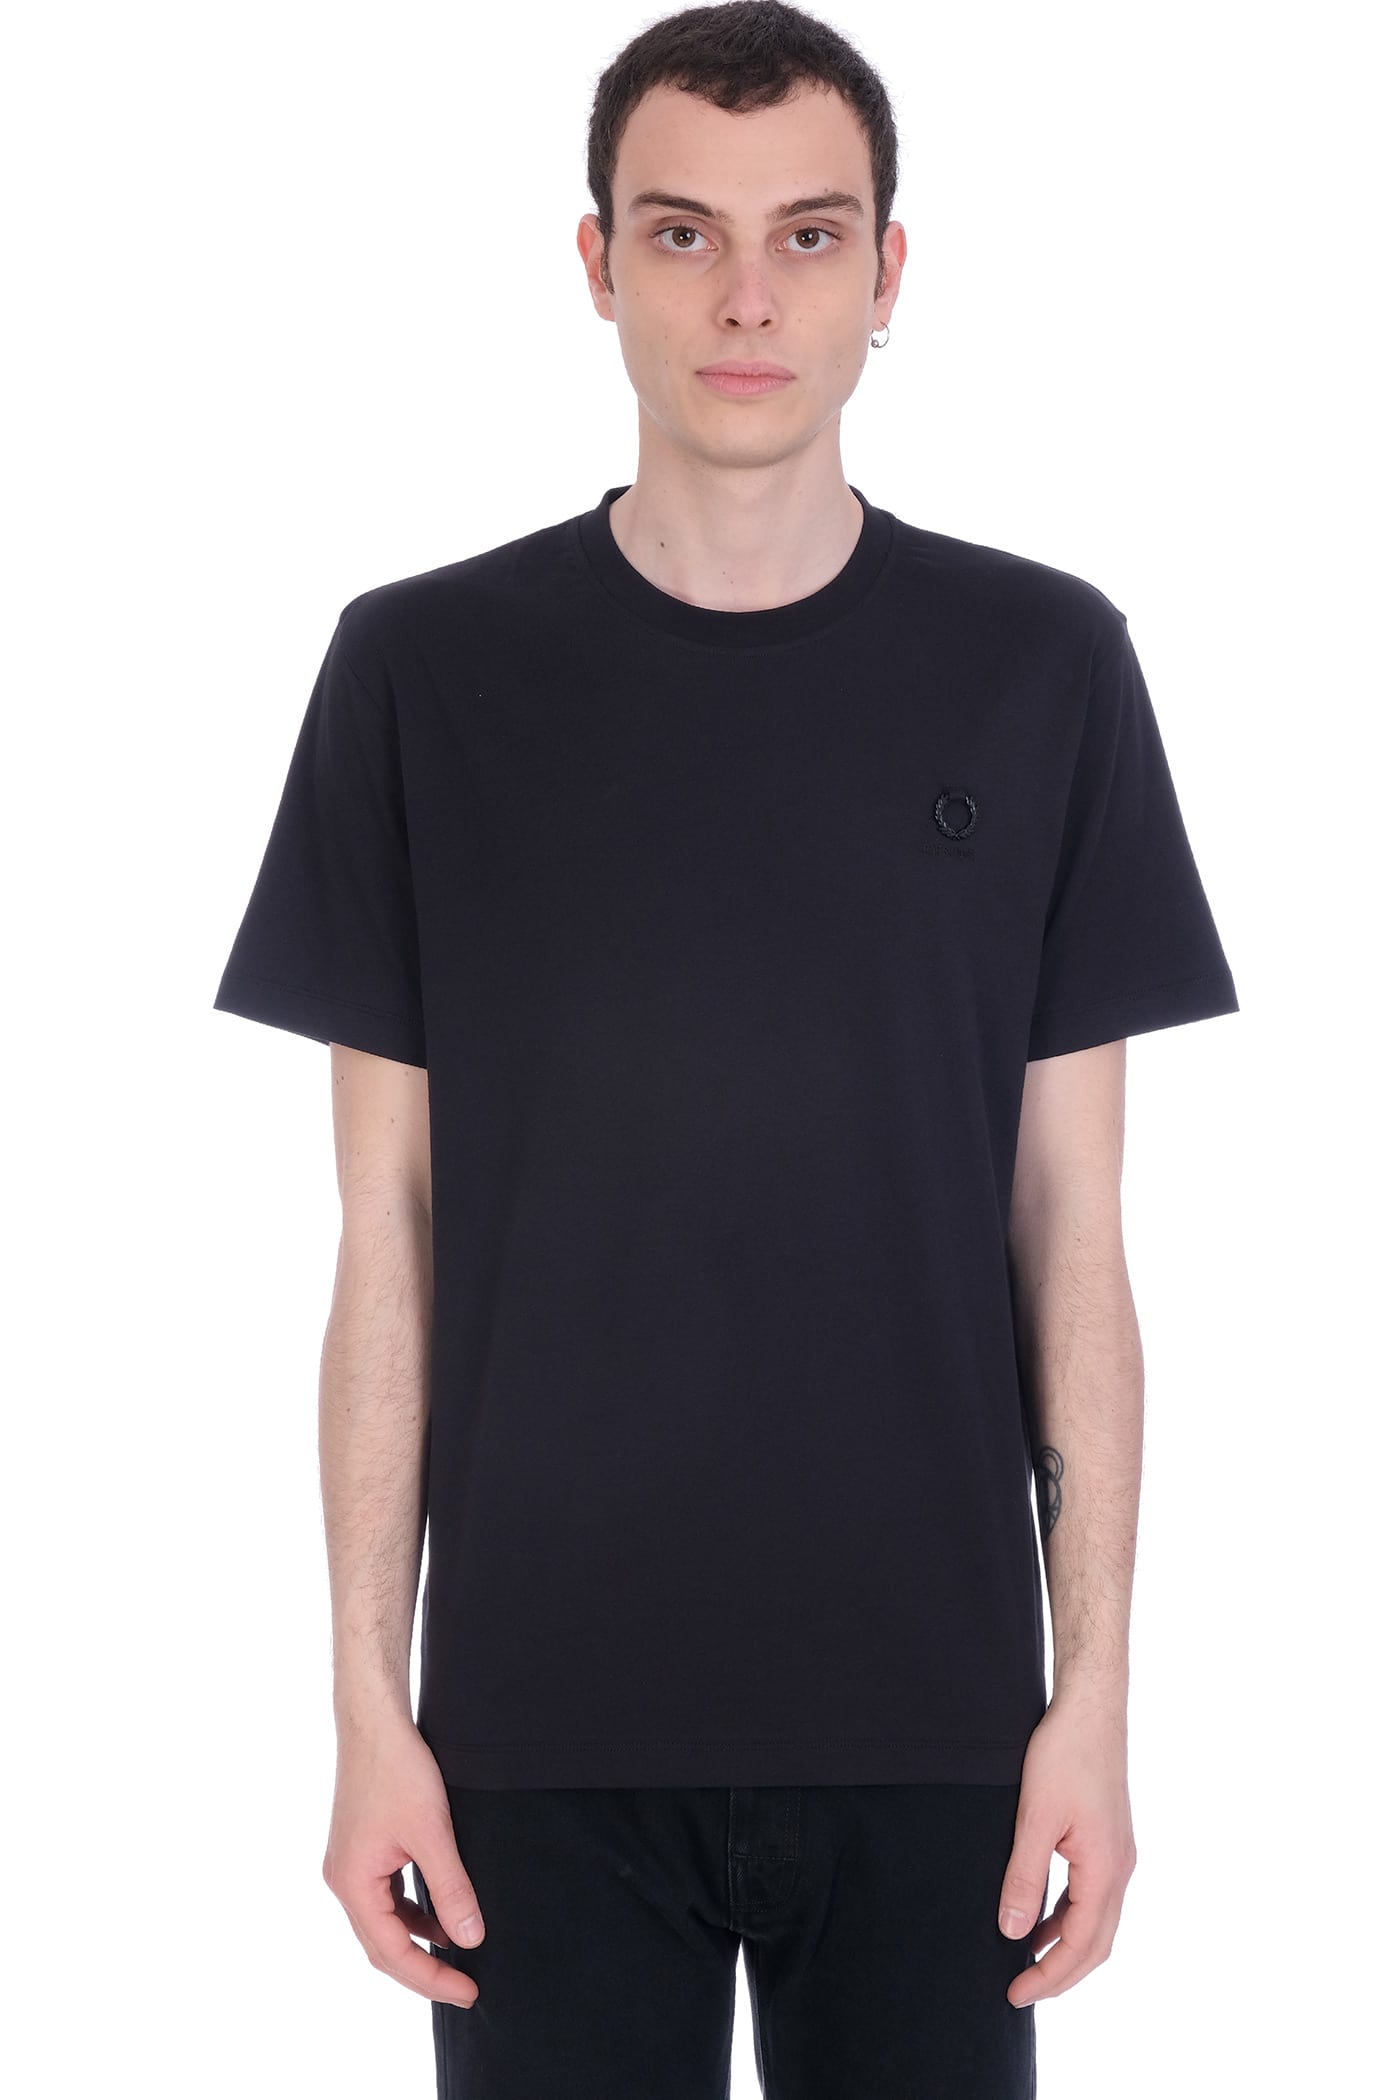 Fred Perry by Raf Simons T-shirt In Black Cotton